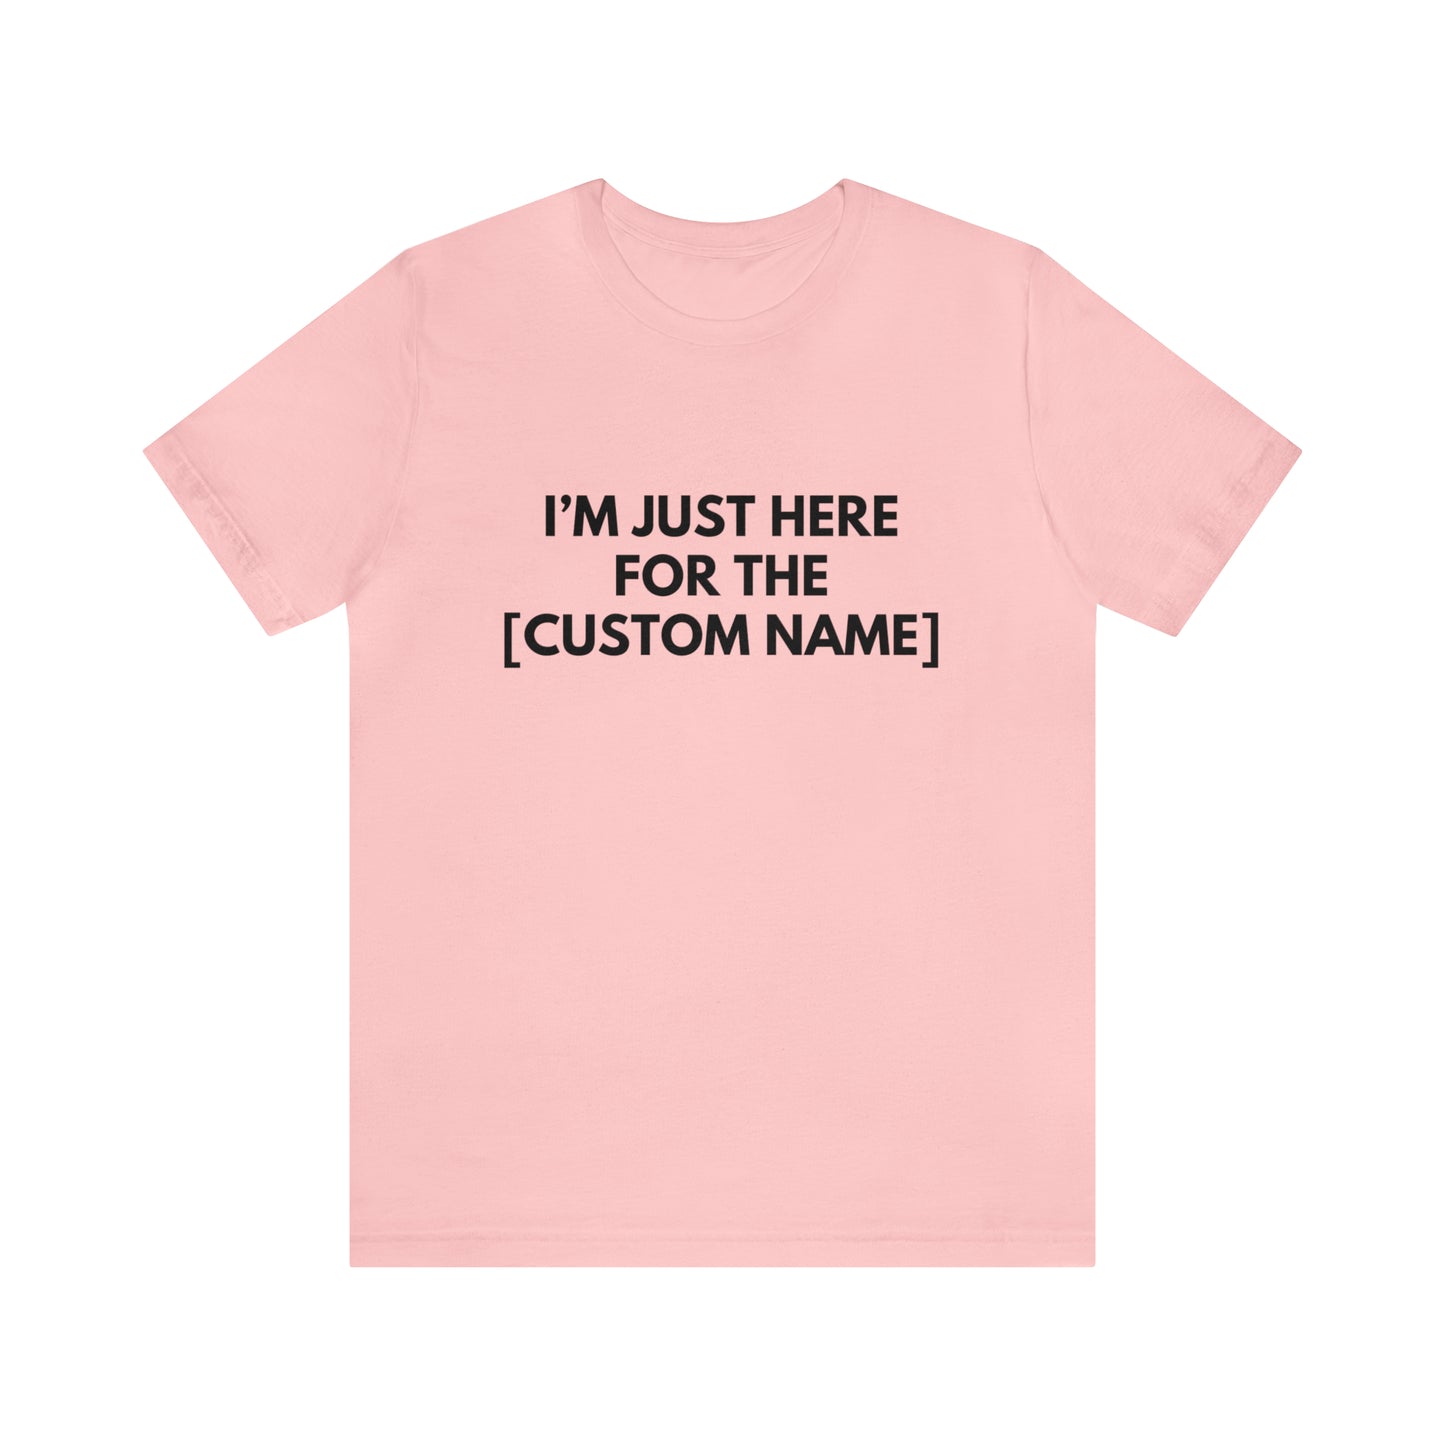 CUSTOM - I'm Just Here For The _____